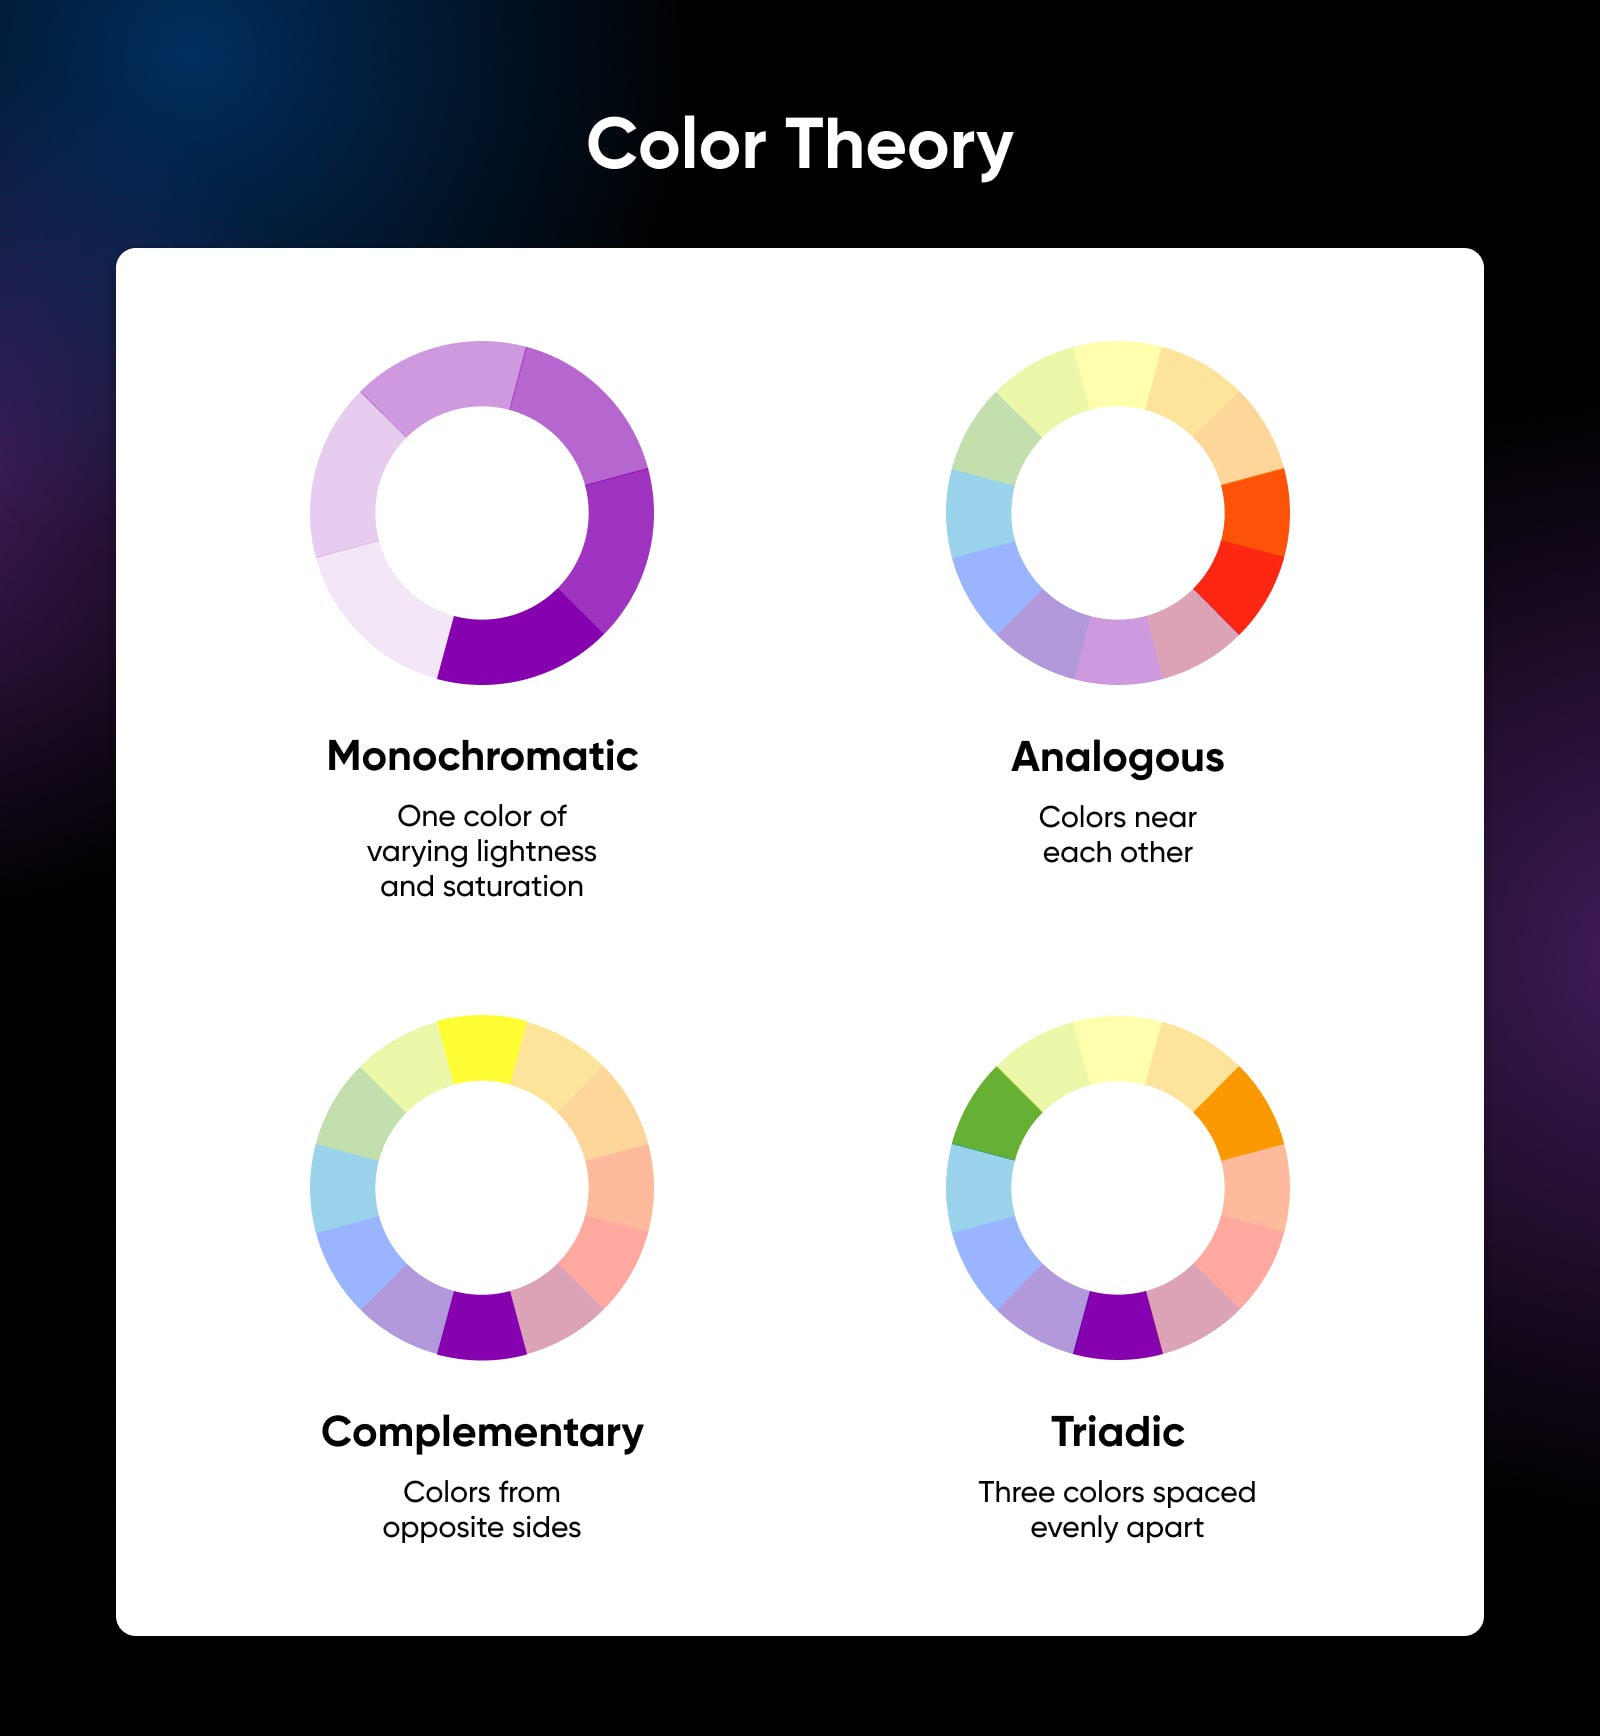 color theory showing the comparison between monochromatic, analogous, complementary, and triadic